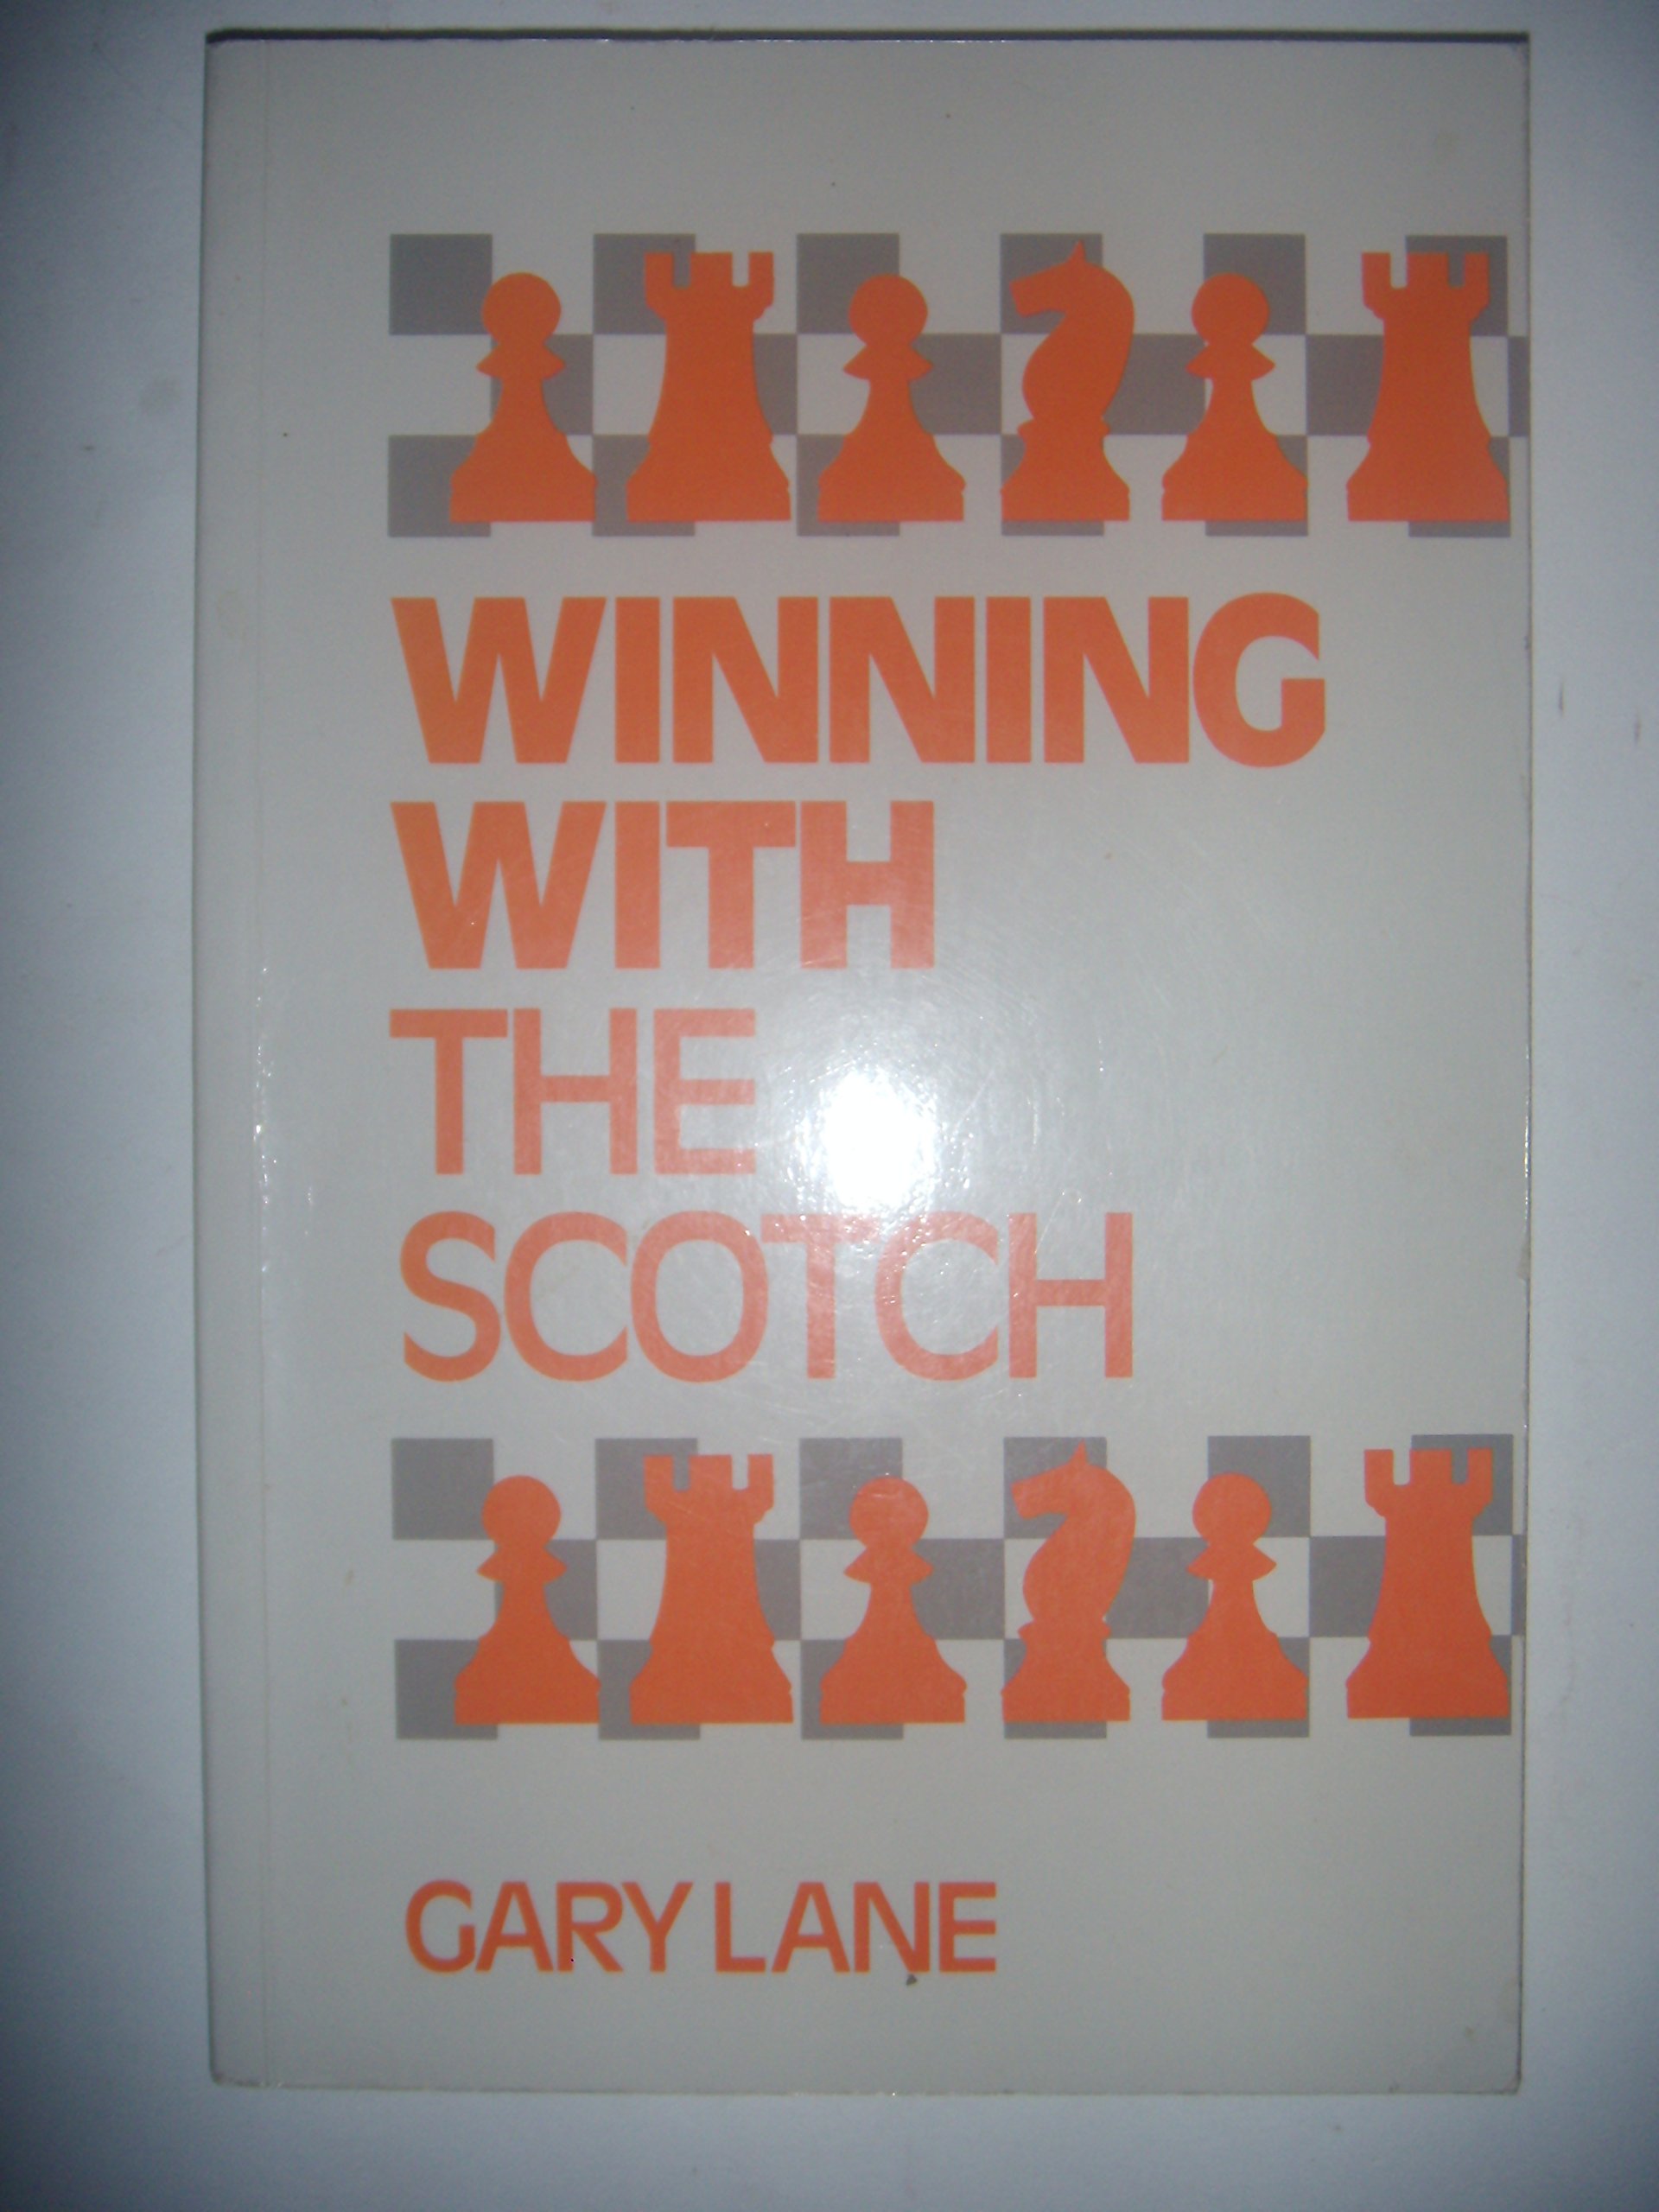 Lane, Gary (1993). Winning with the Scotch. Henry Holt. ISBN 0-8050-2940-0.